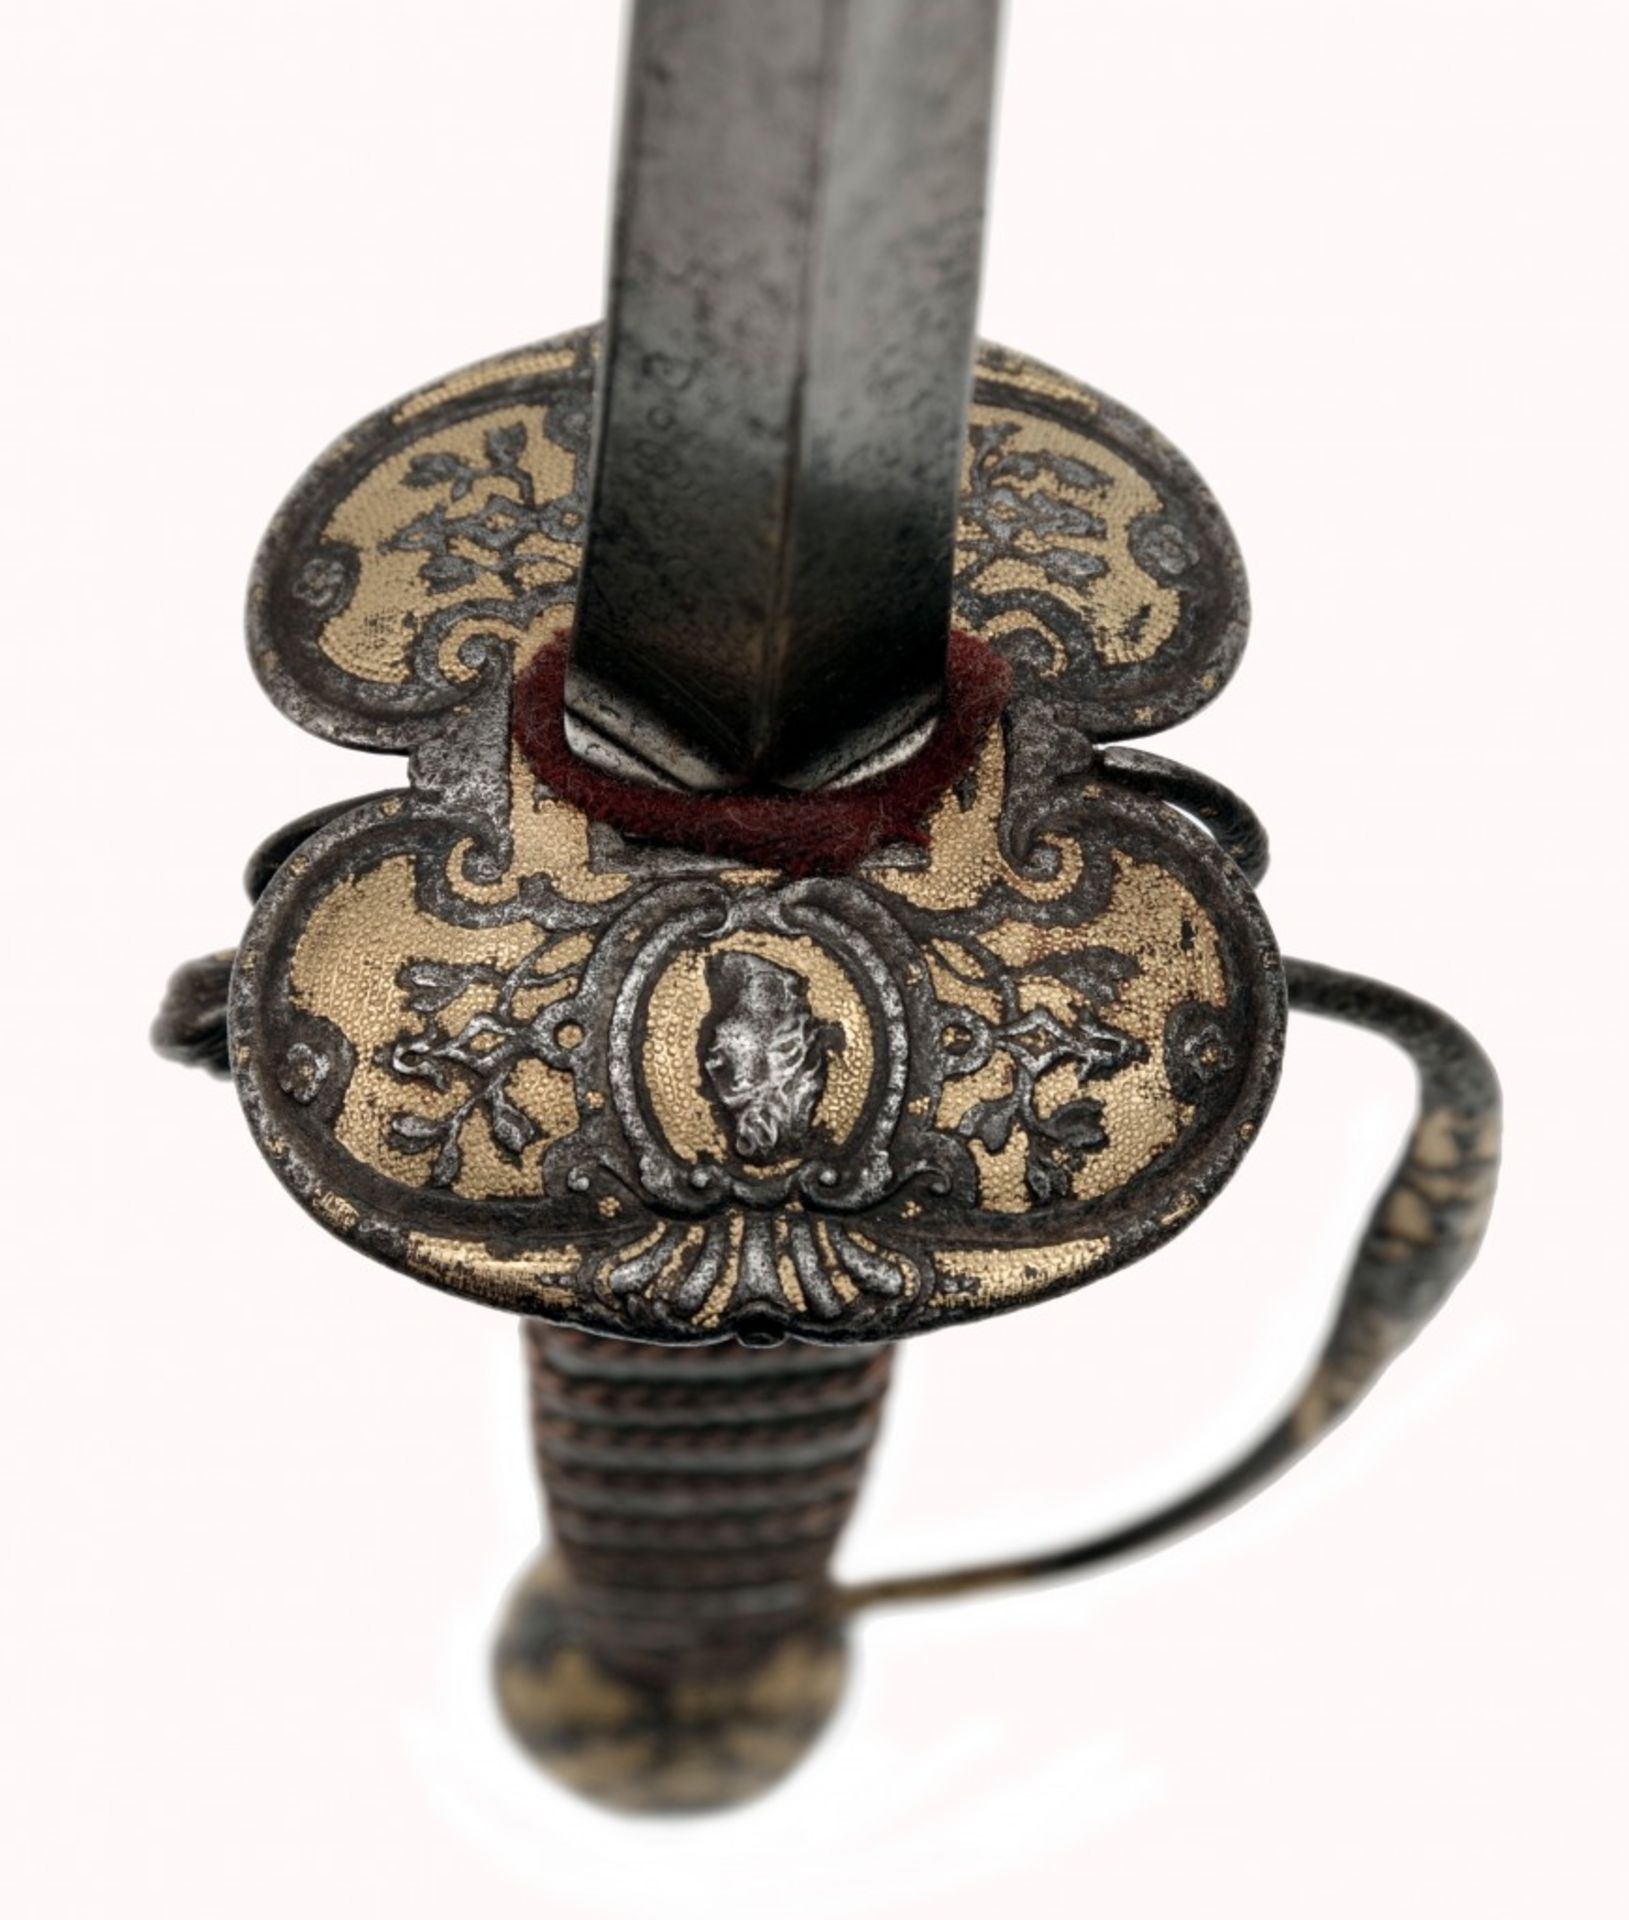 A French Gilt Small-sword with Chiselled Hilt by Jean Louis Guyon the Elder - Image 3 of 11